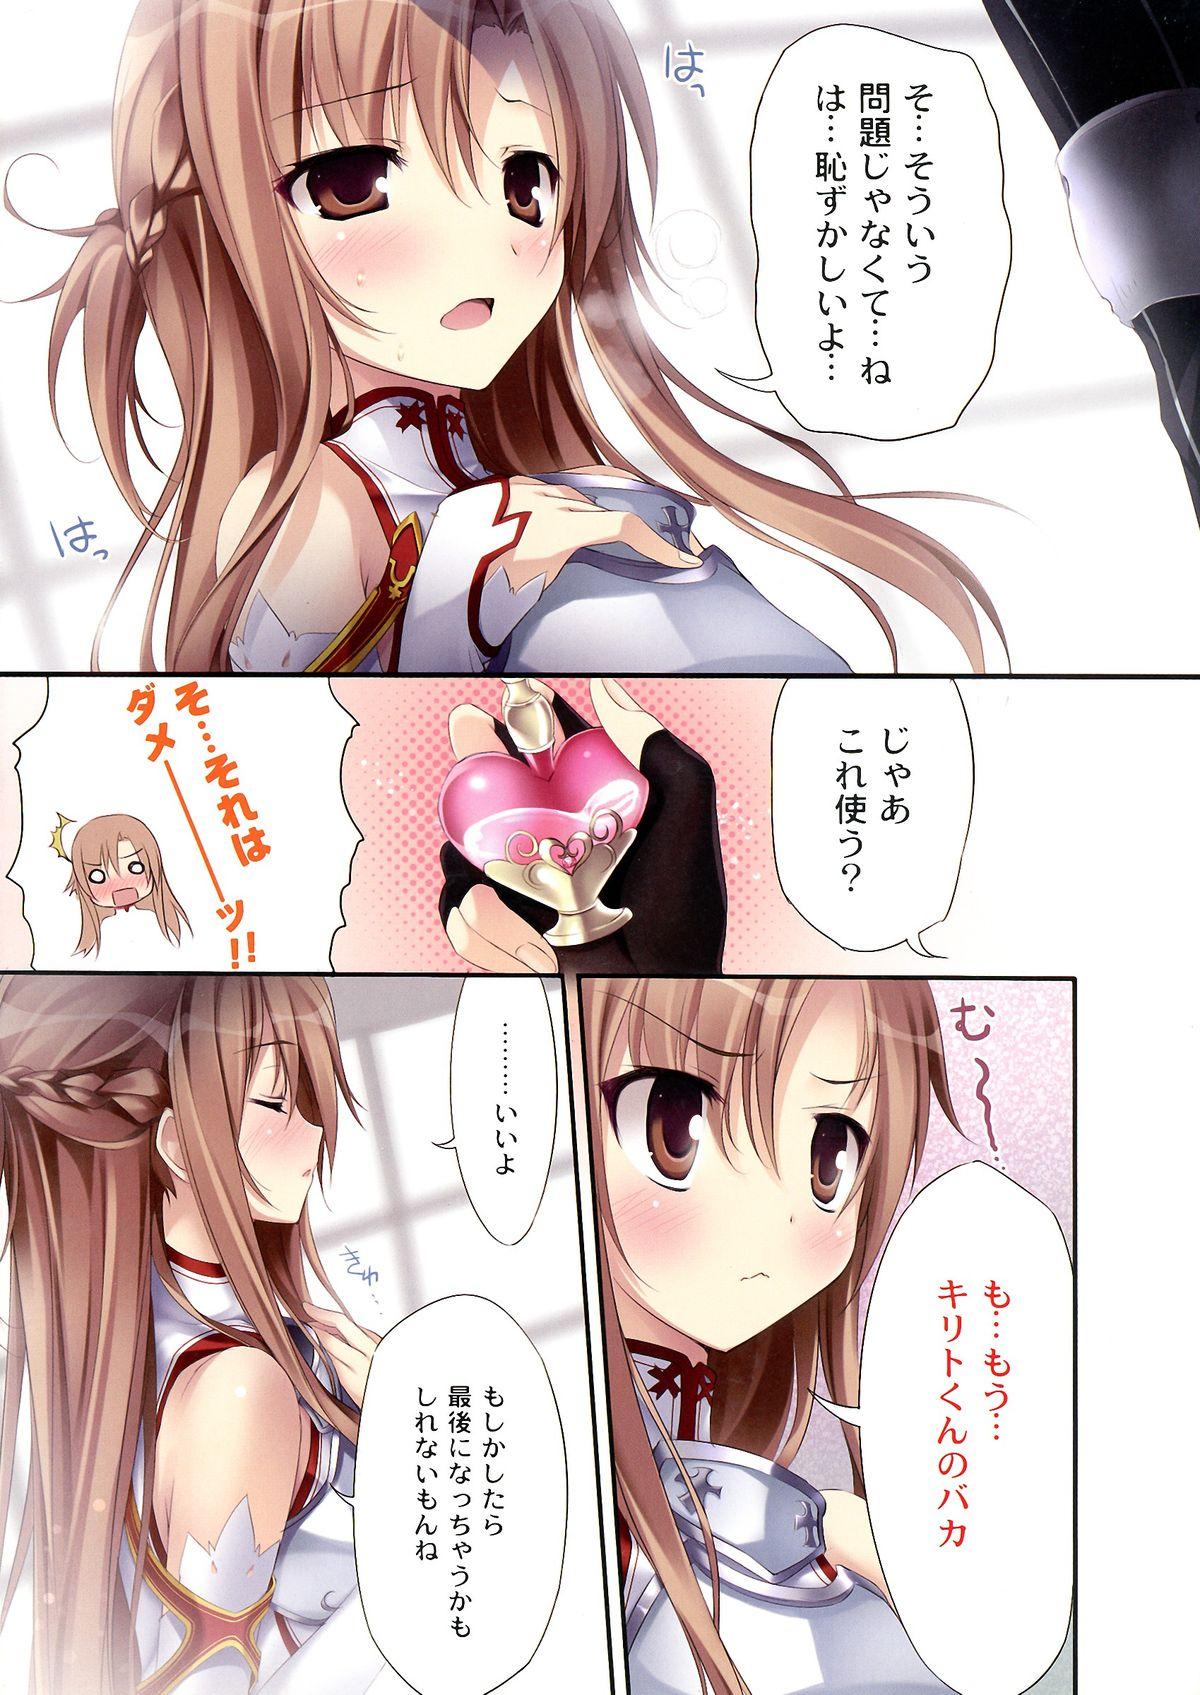 Home KARORFUL MIX EX9 - Sword art online Gay - Page 4